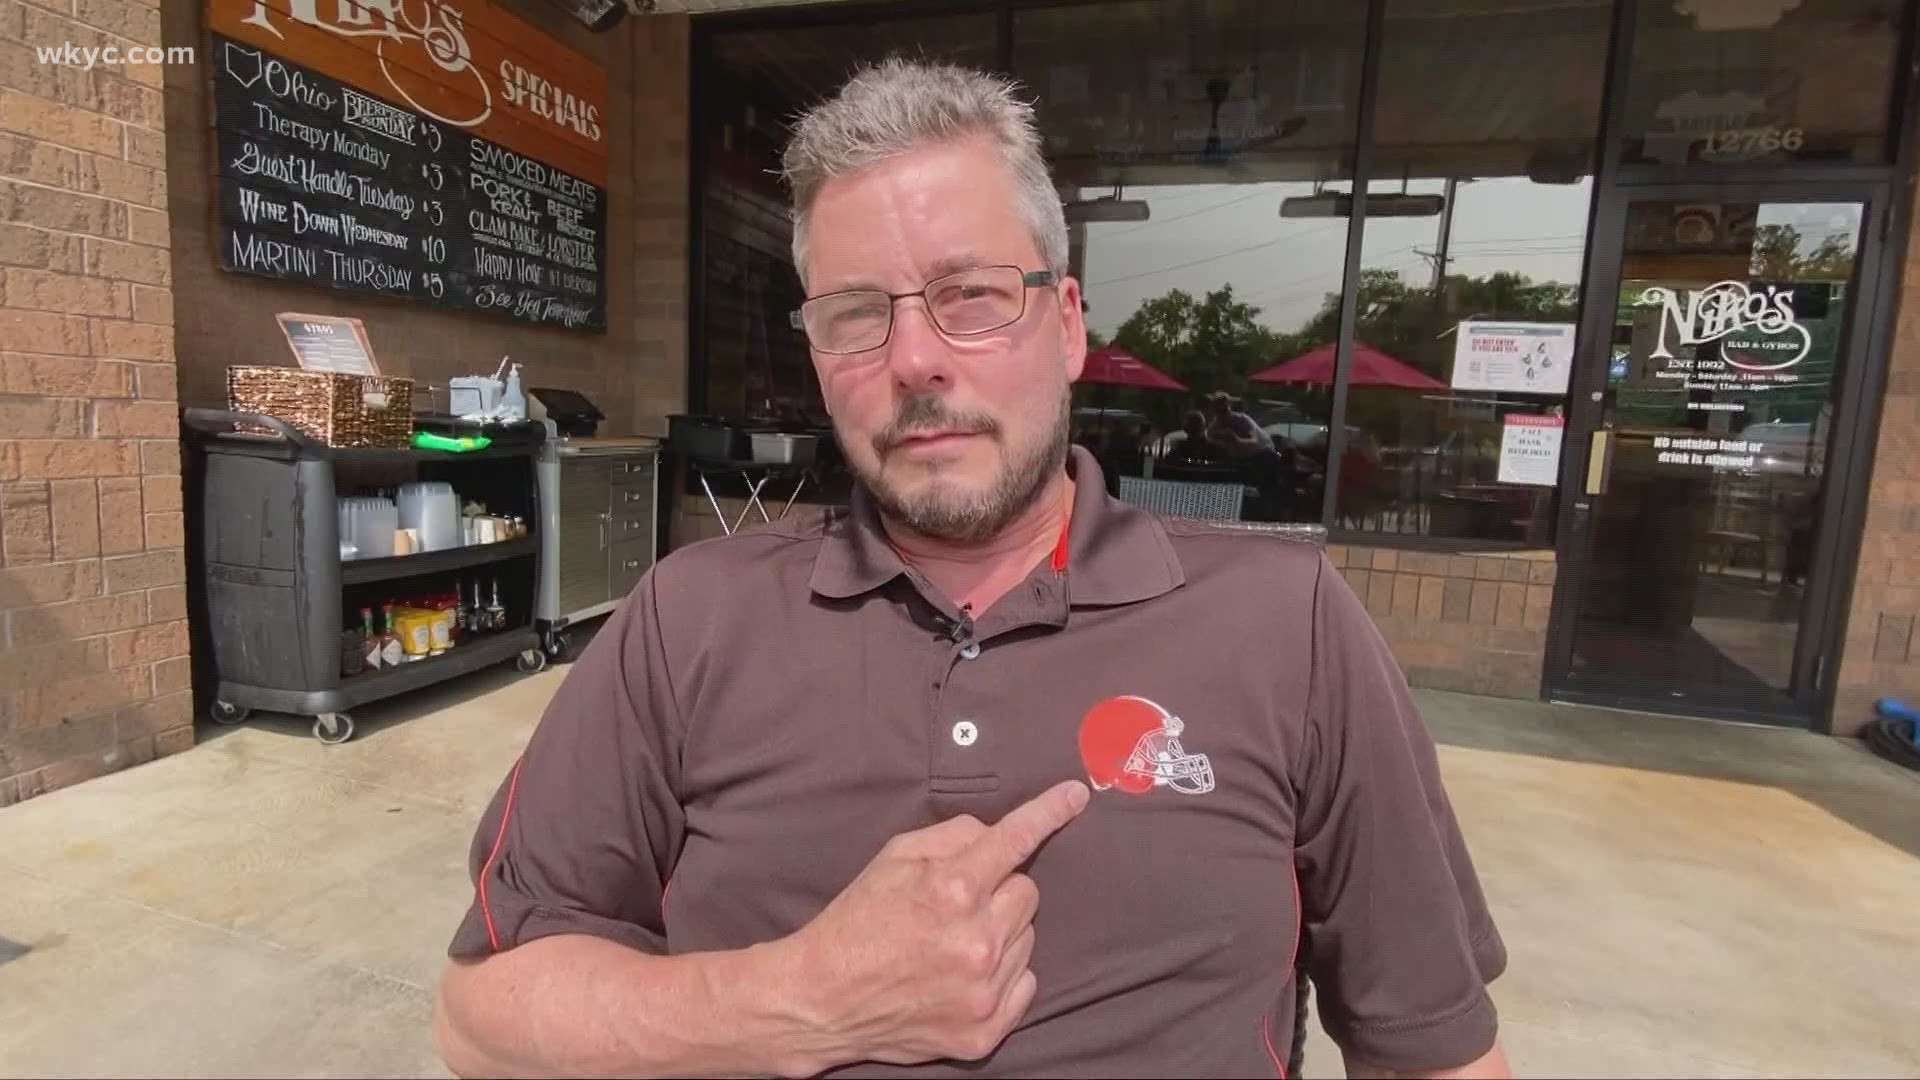 Sept. 17, 2020: We meet the president of the Browns Backers North Royalton chapter. Their mission: Cheer for the Cleveland Browns and give back to the community.